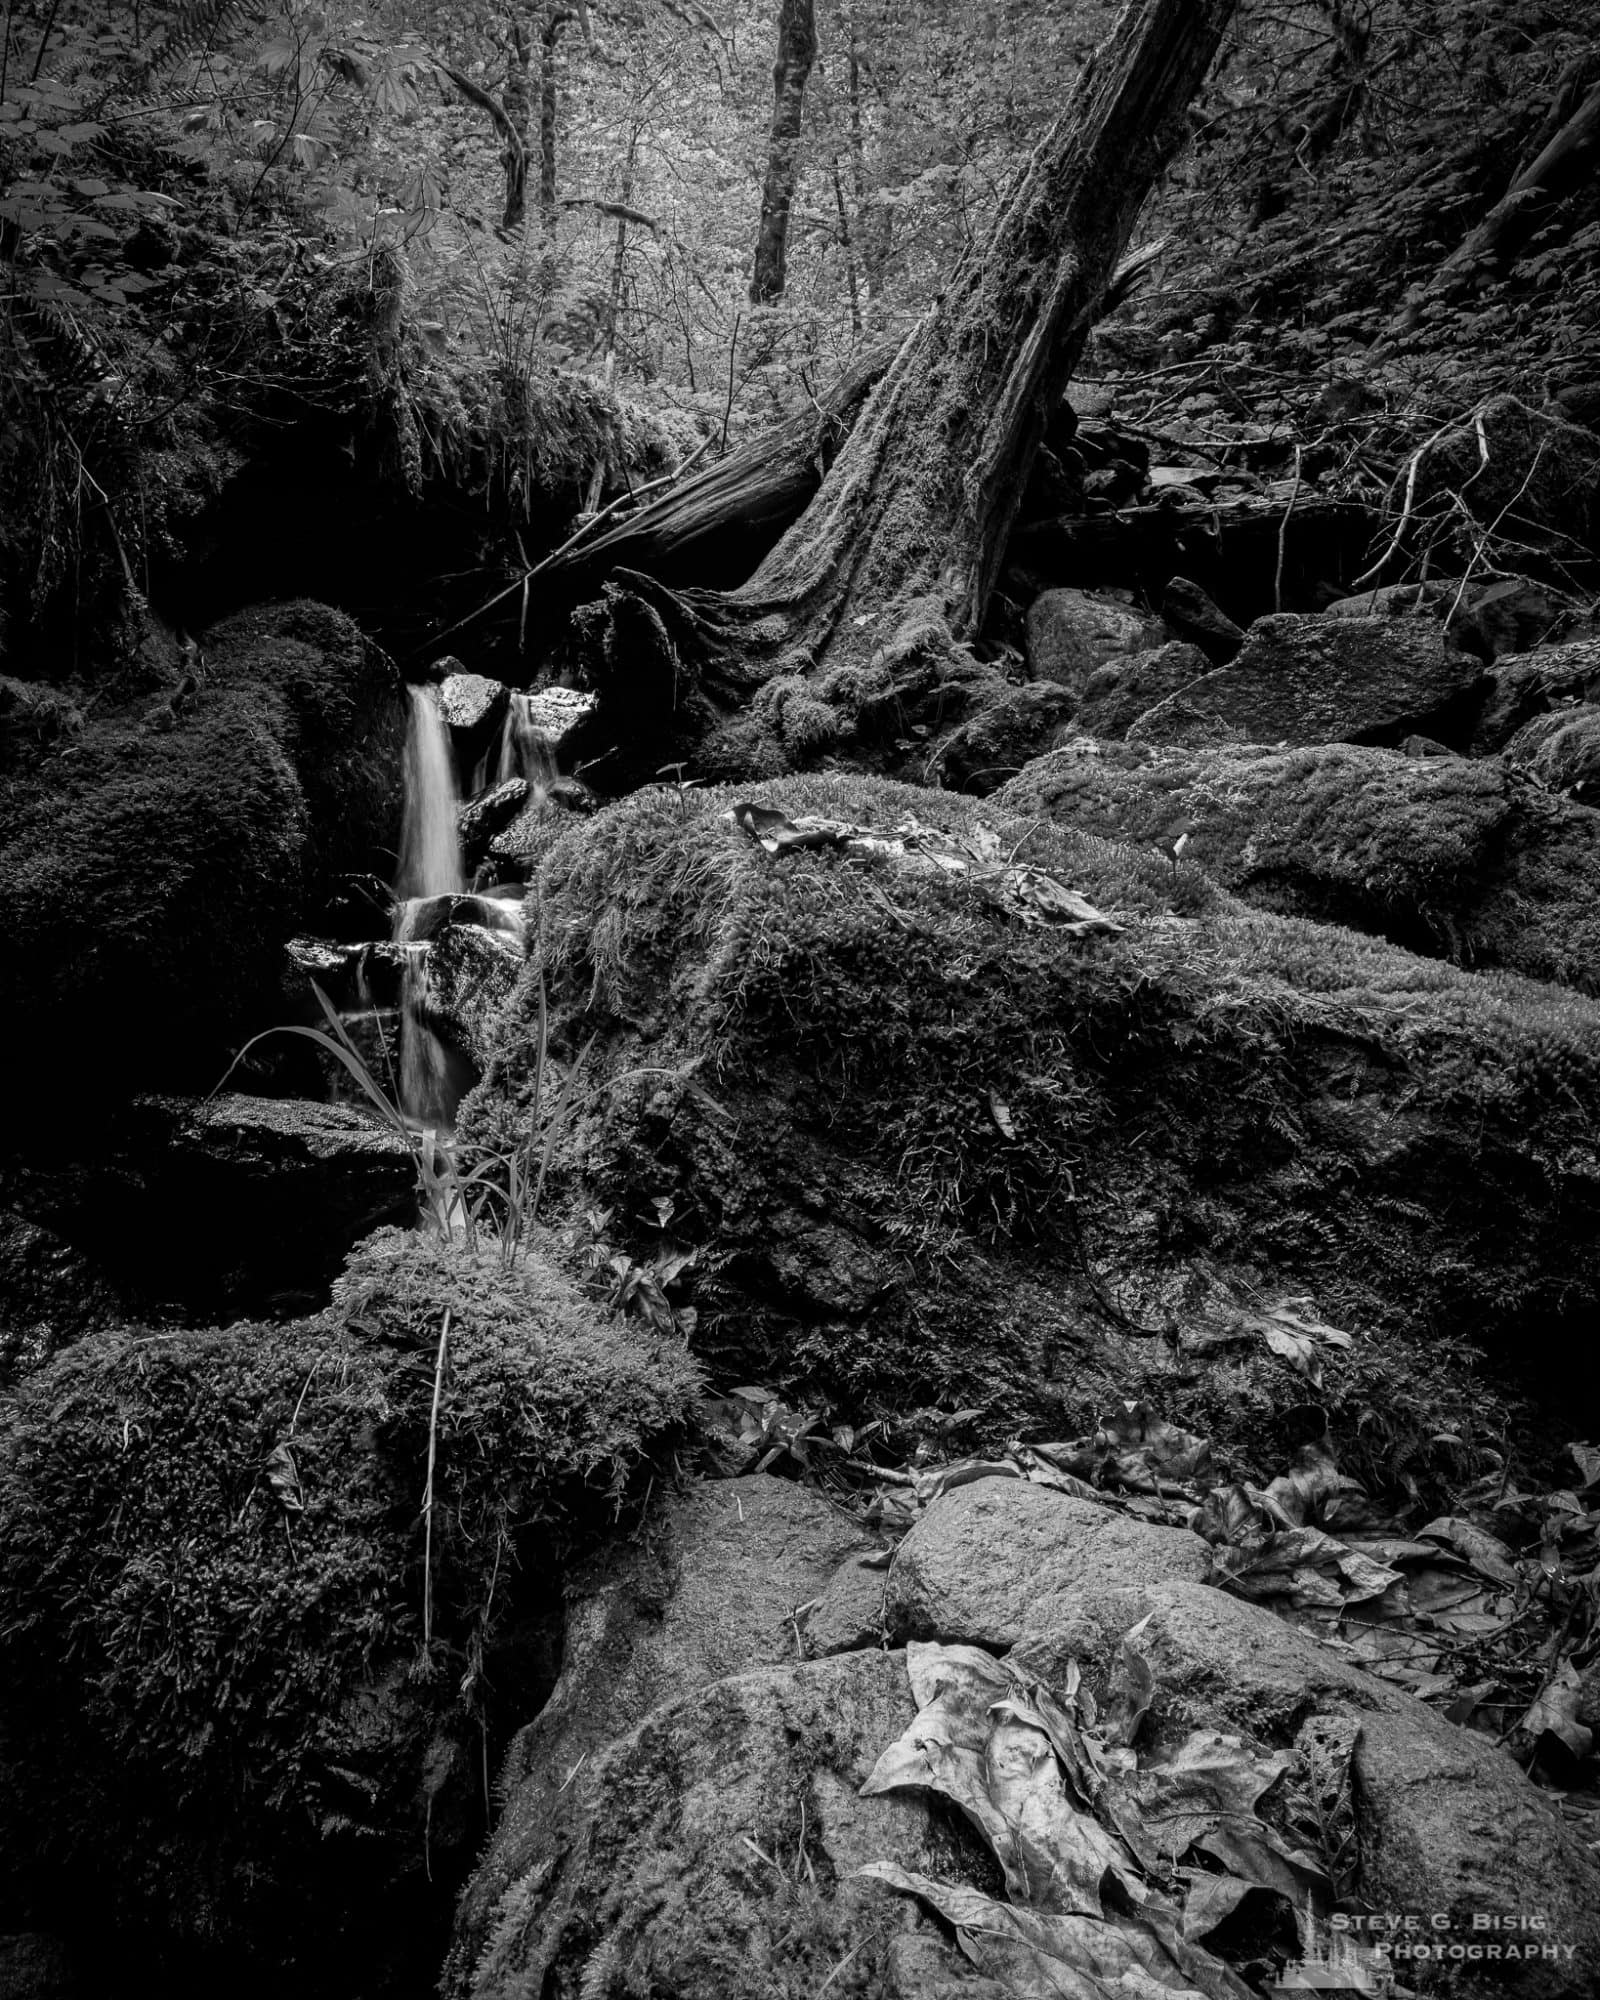 A black and white landscape photograph of a seasonal creek found along Forest Road 52 (Skate Creek Road) in the Gifford Pinchot National Forest, Washington.